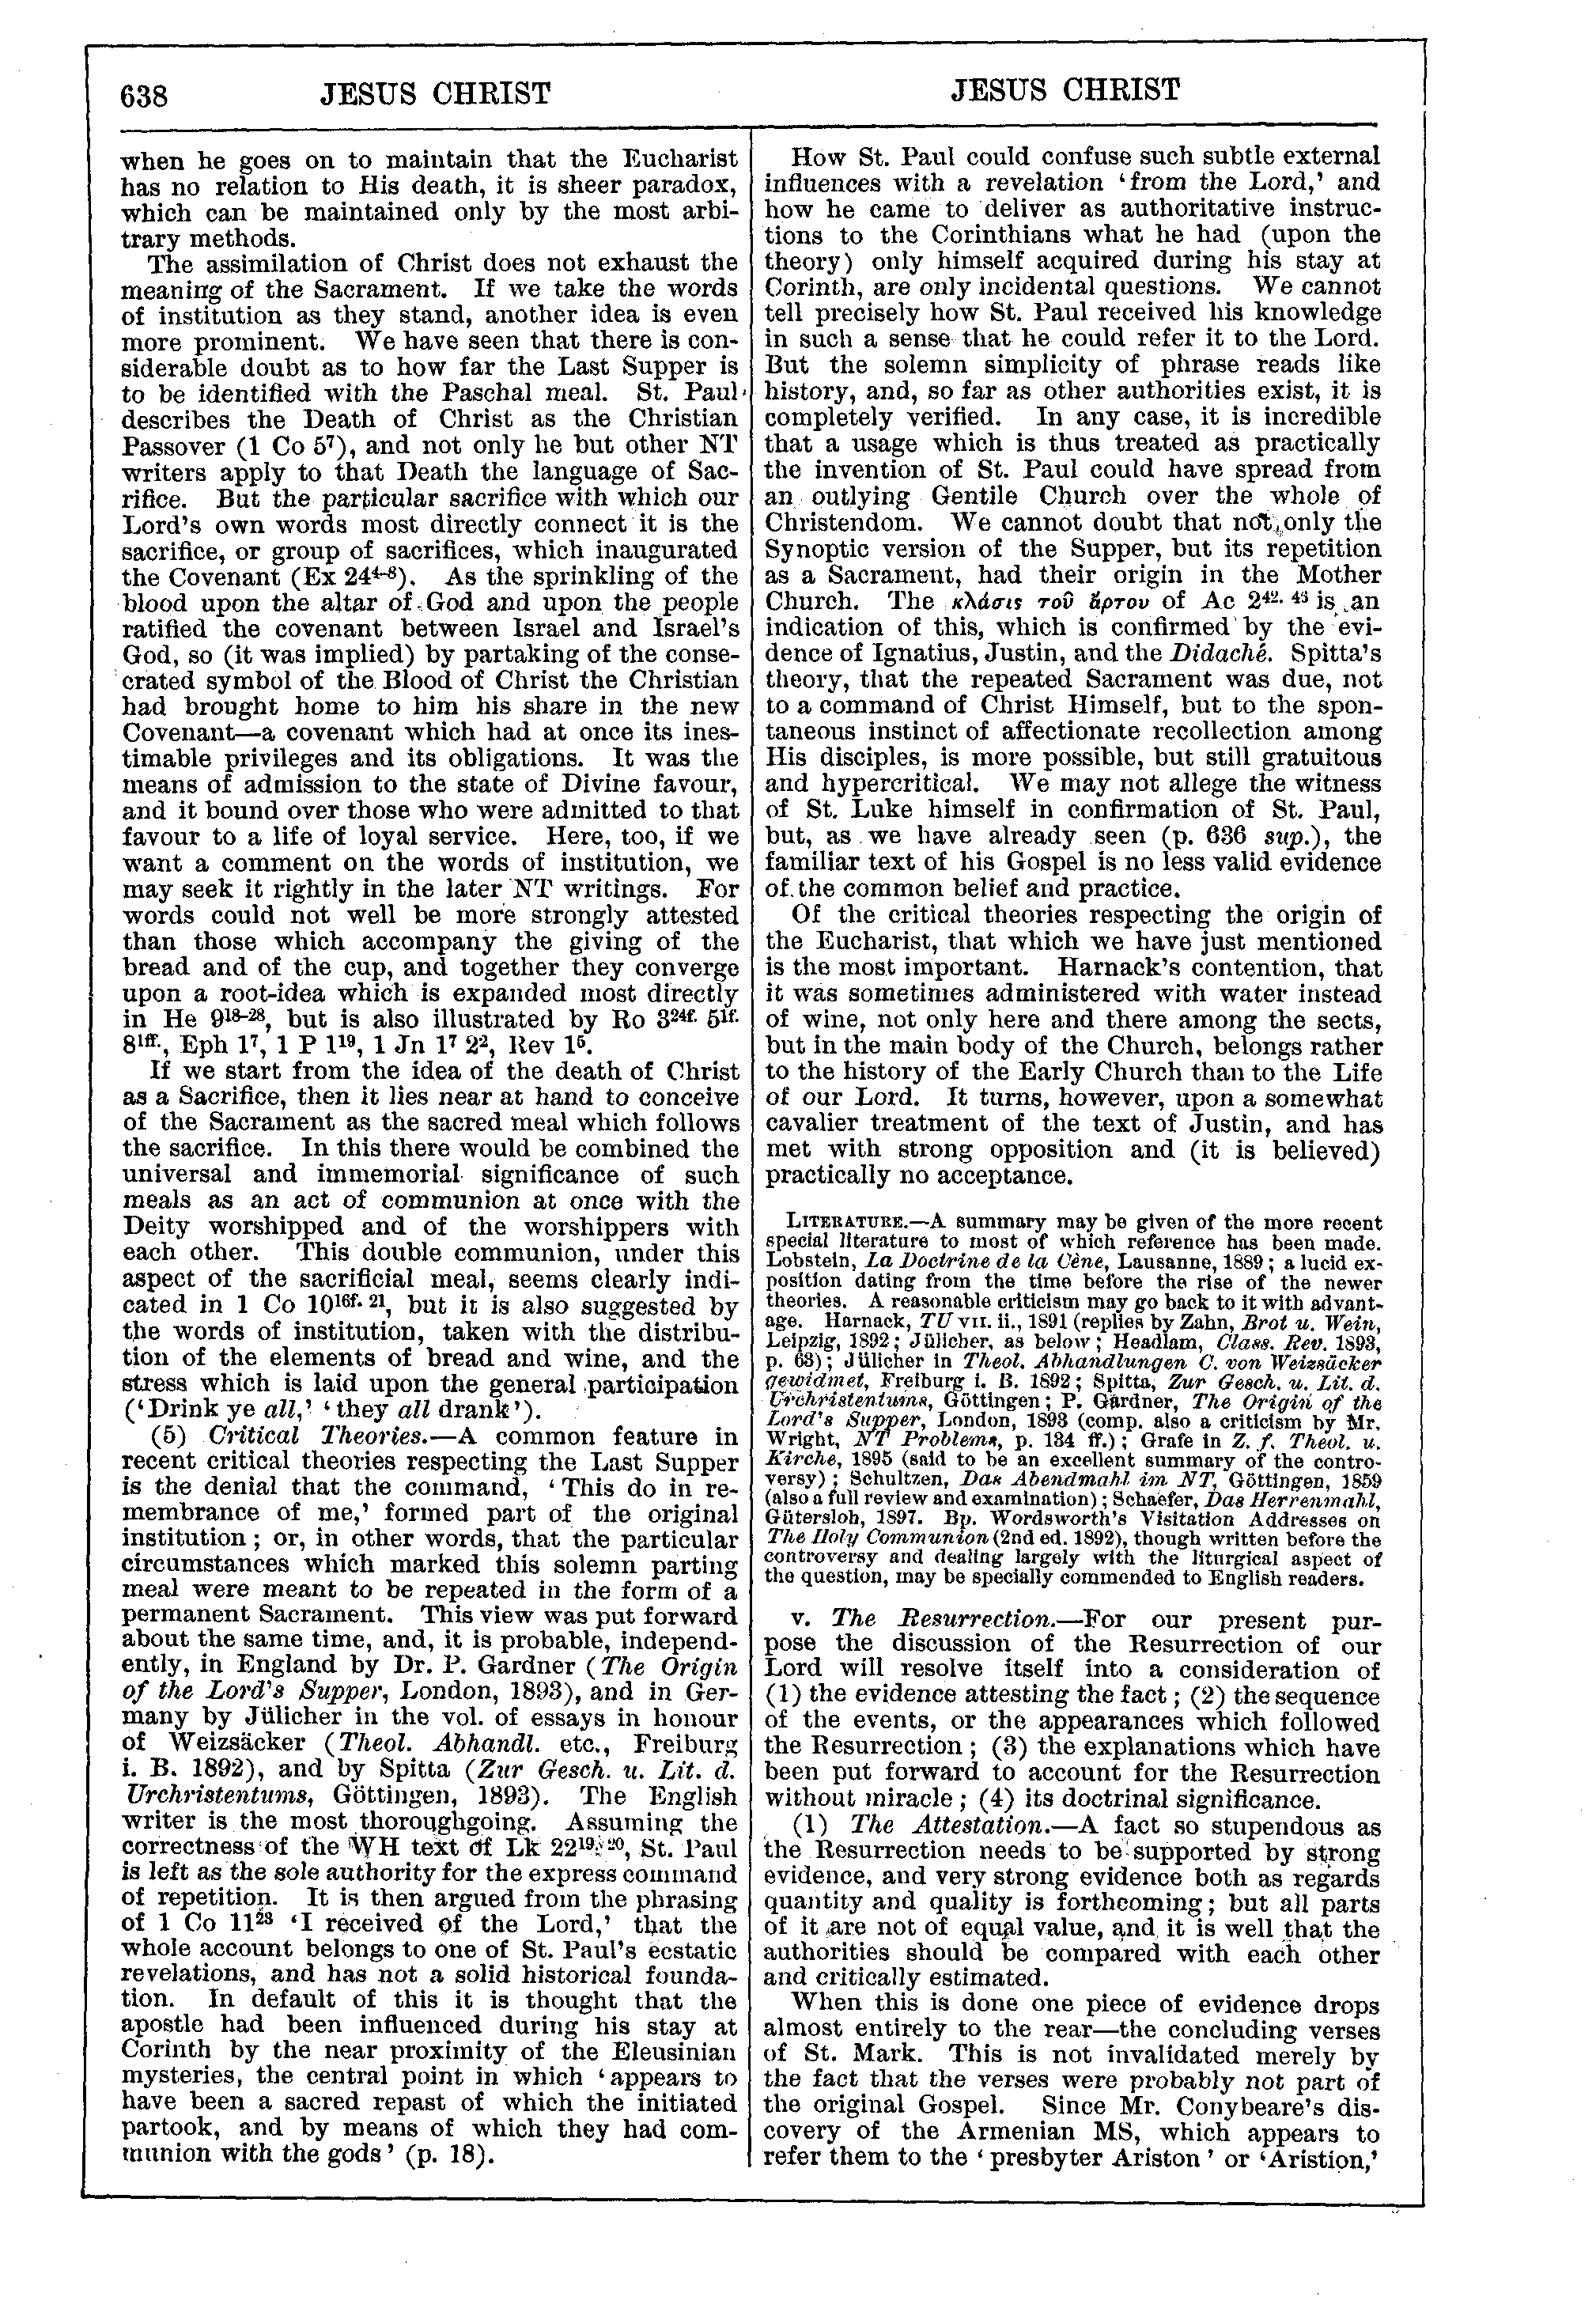 Image of page 638